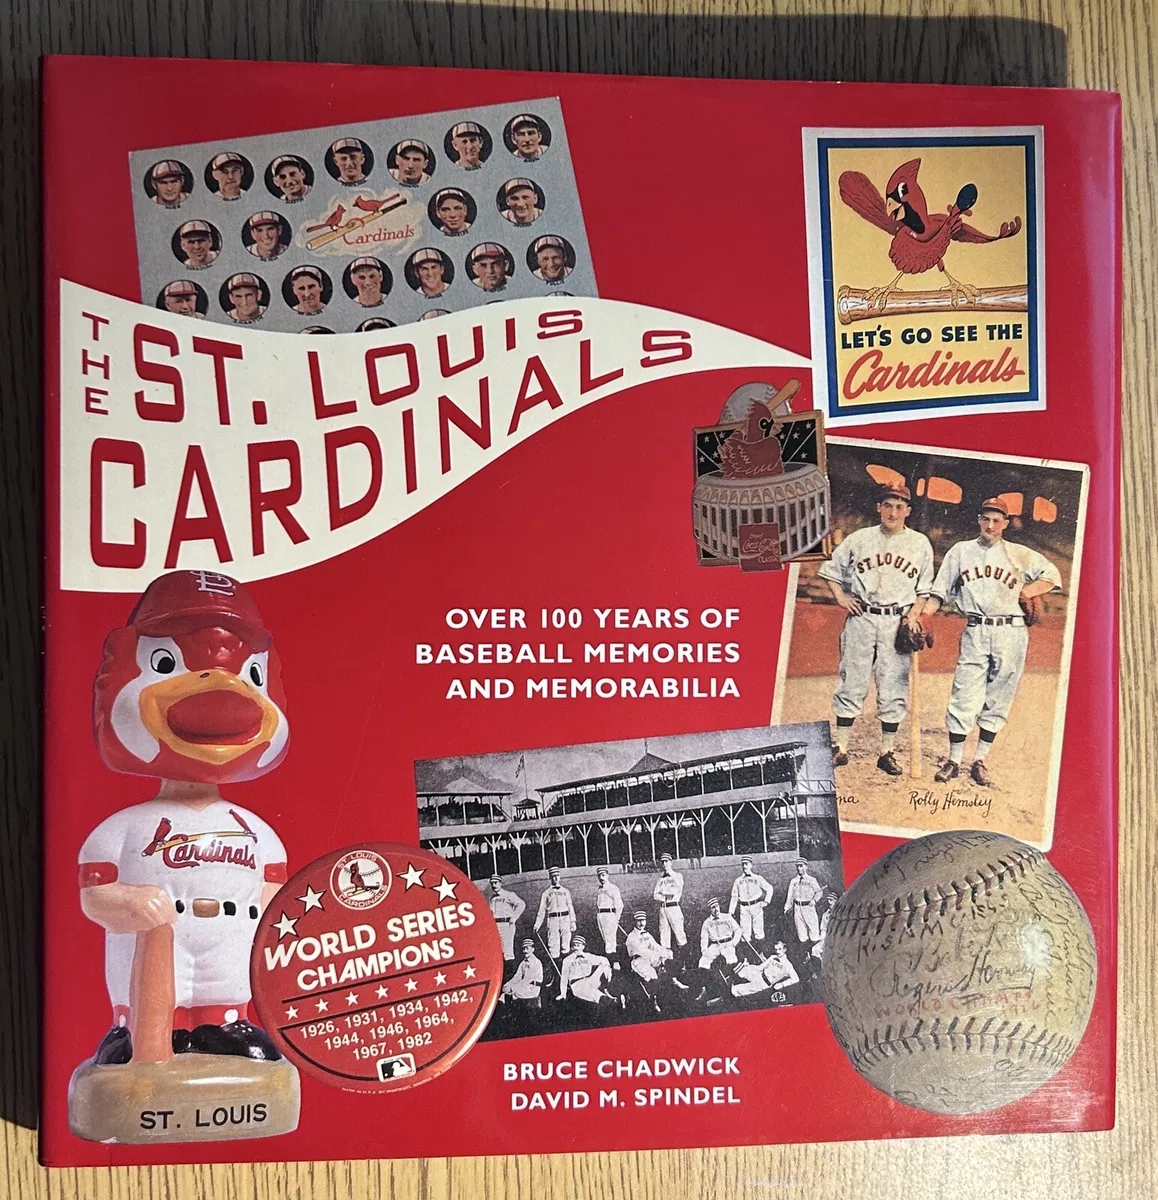 St. Louis Cardinals: Over 100 Years of Baseball Memories and Memorabilia  (Major League Memories) 1st edition by Chadwick, Bruce (1995) Hardcover